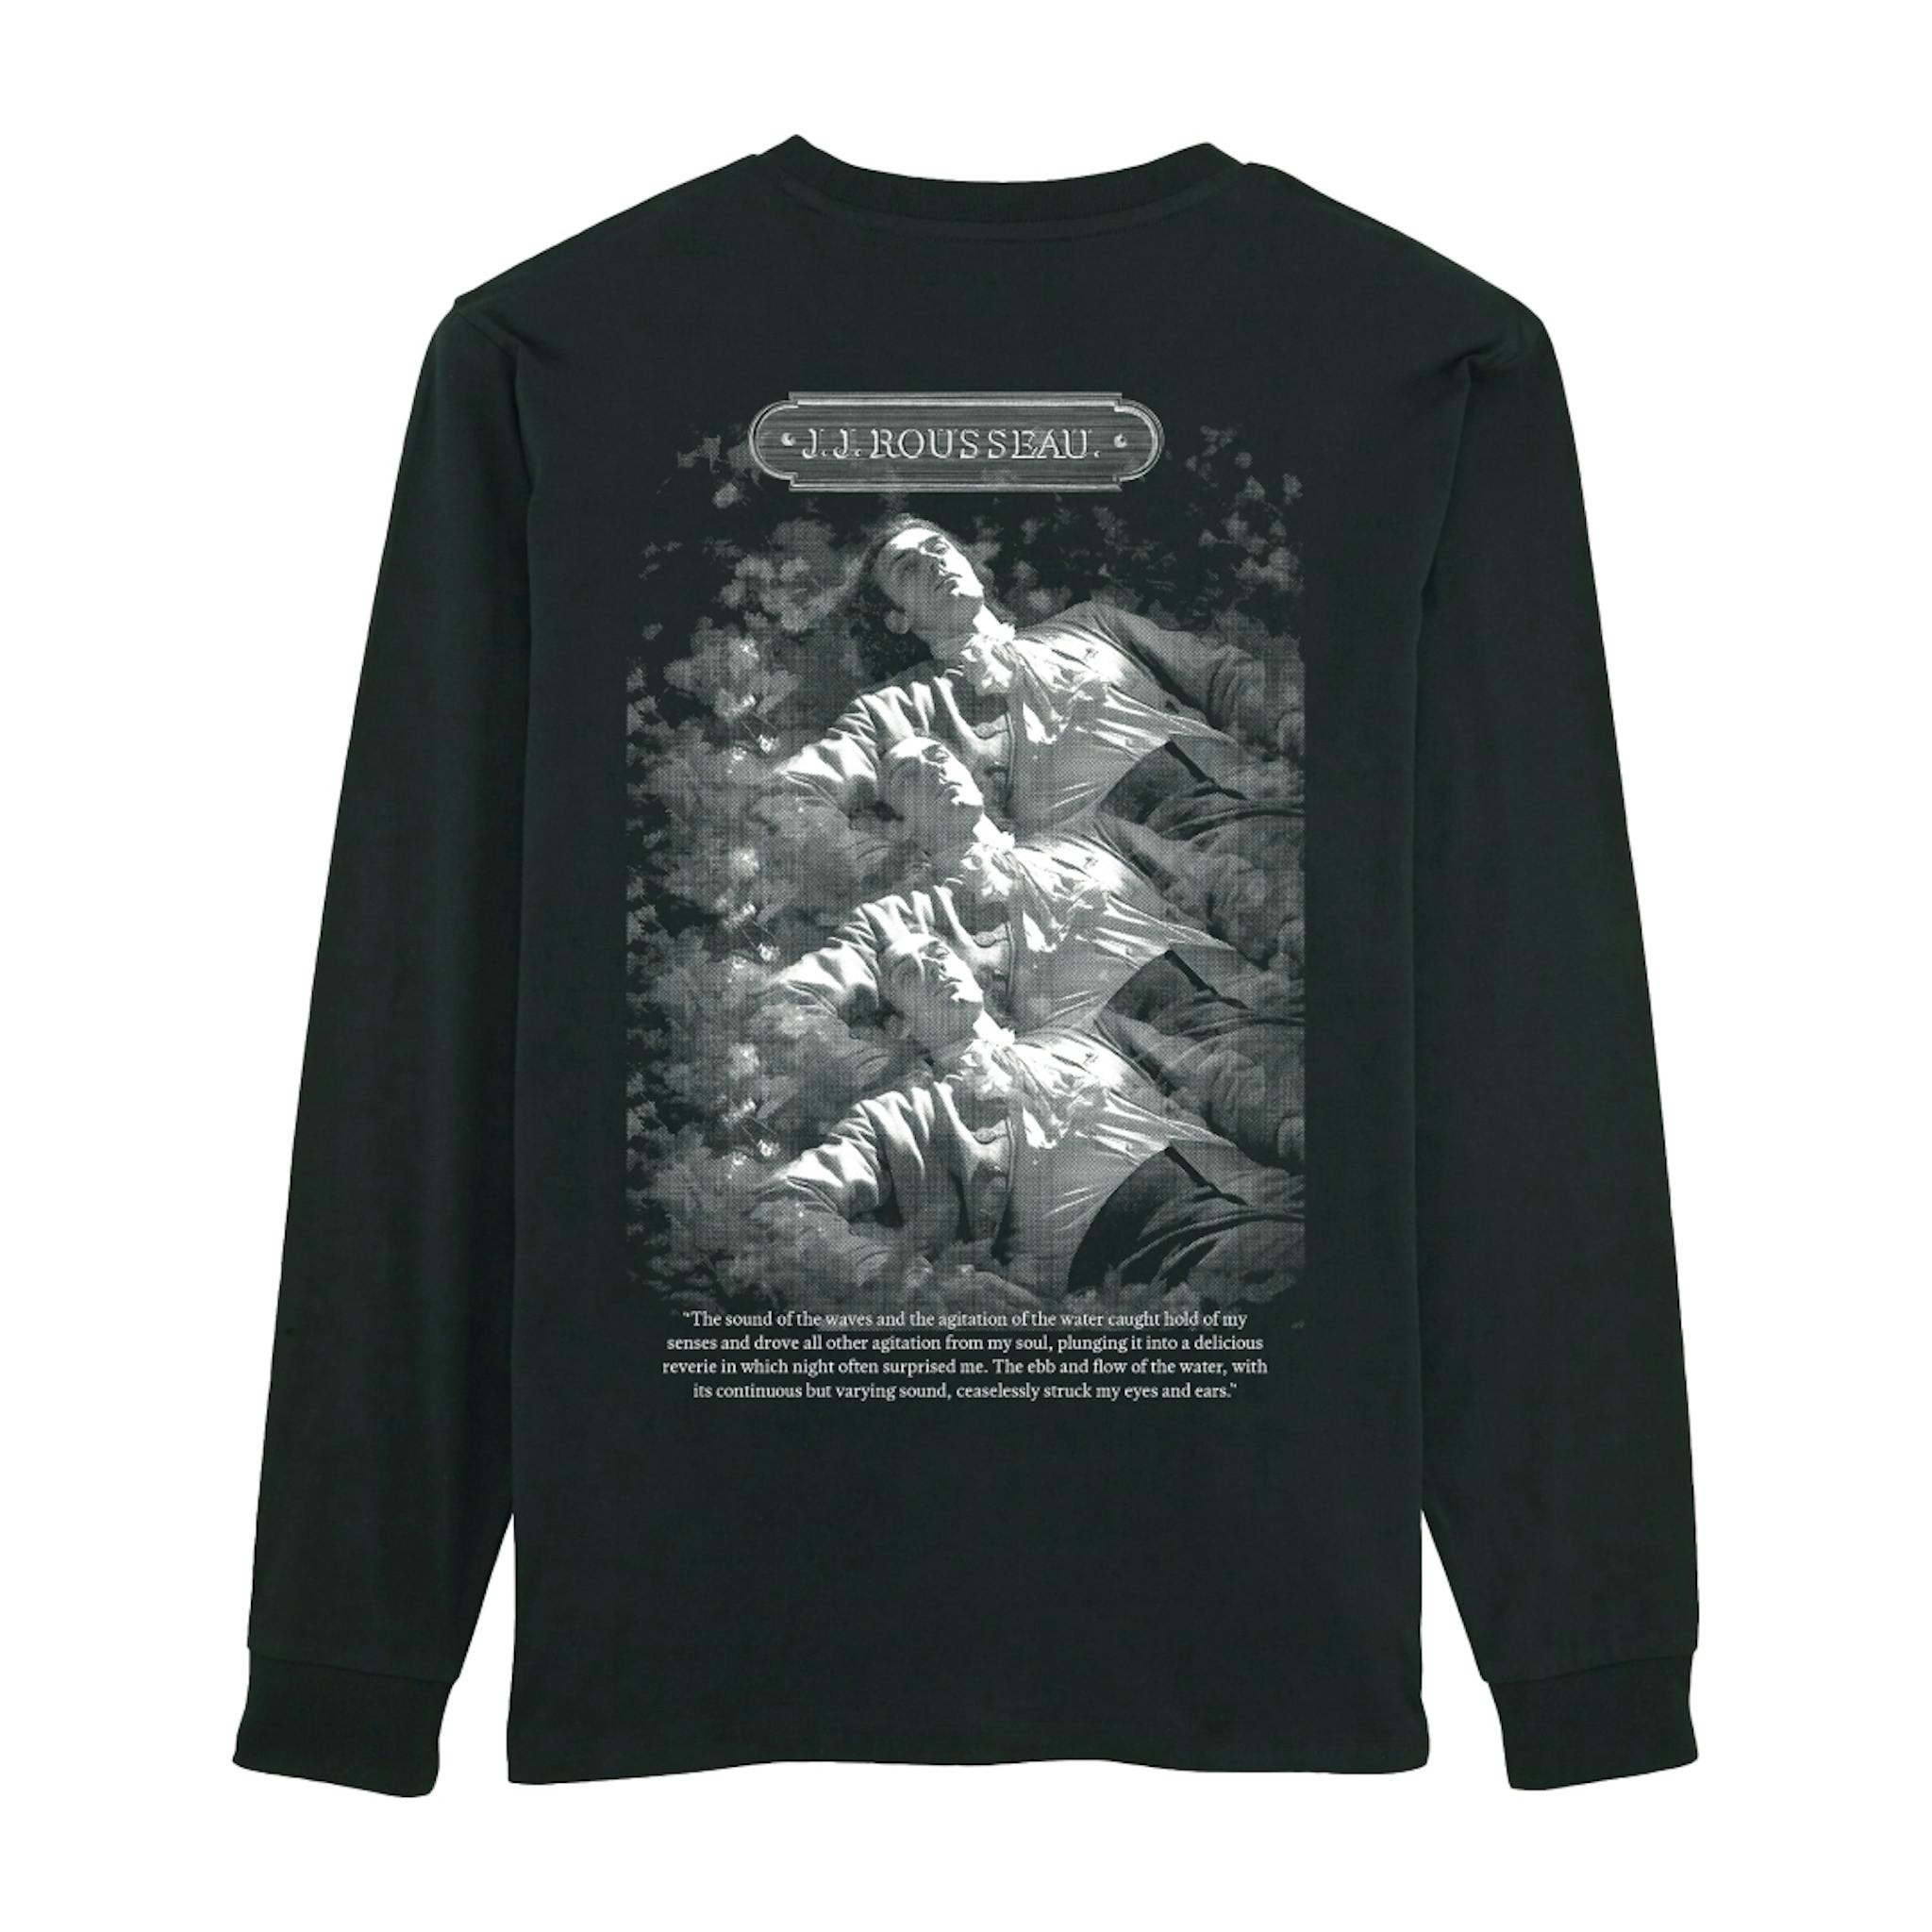 A black long-sleeved shirt featuring a grayscale graphic of Jean-Jacques Rousseau in a natural setting with text above and a quote below the image.